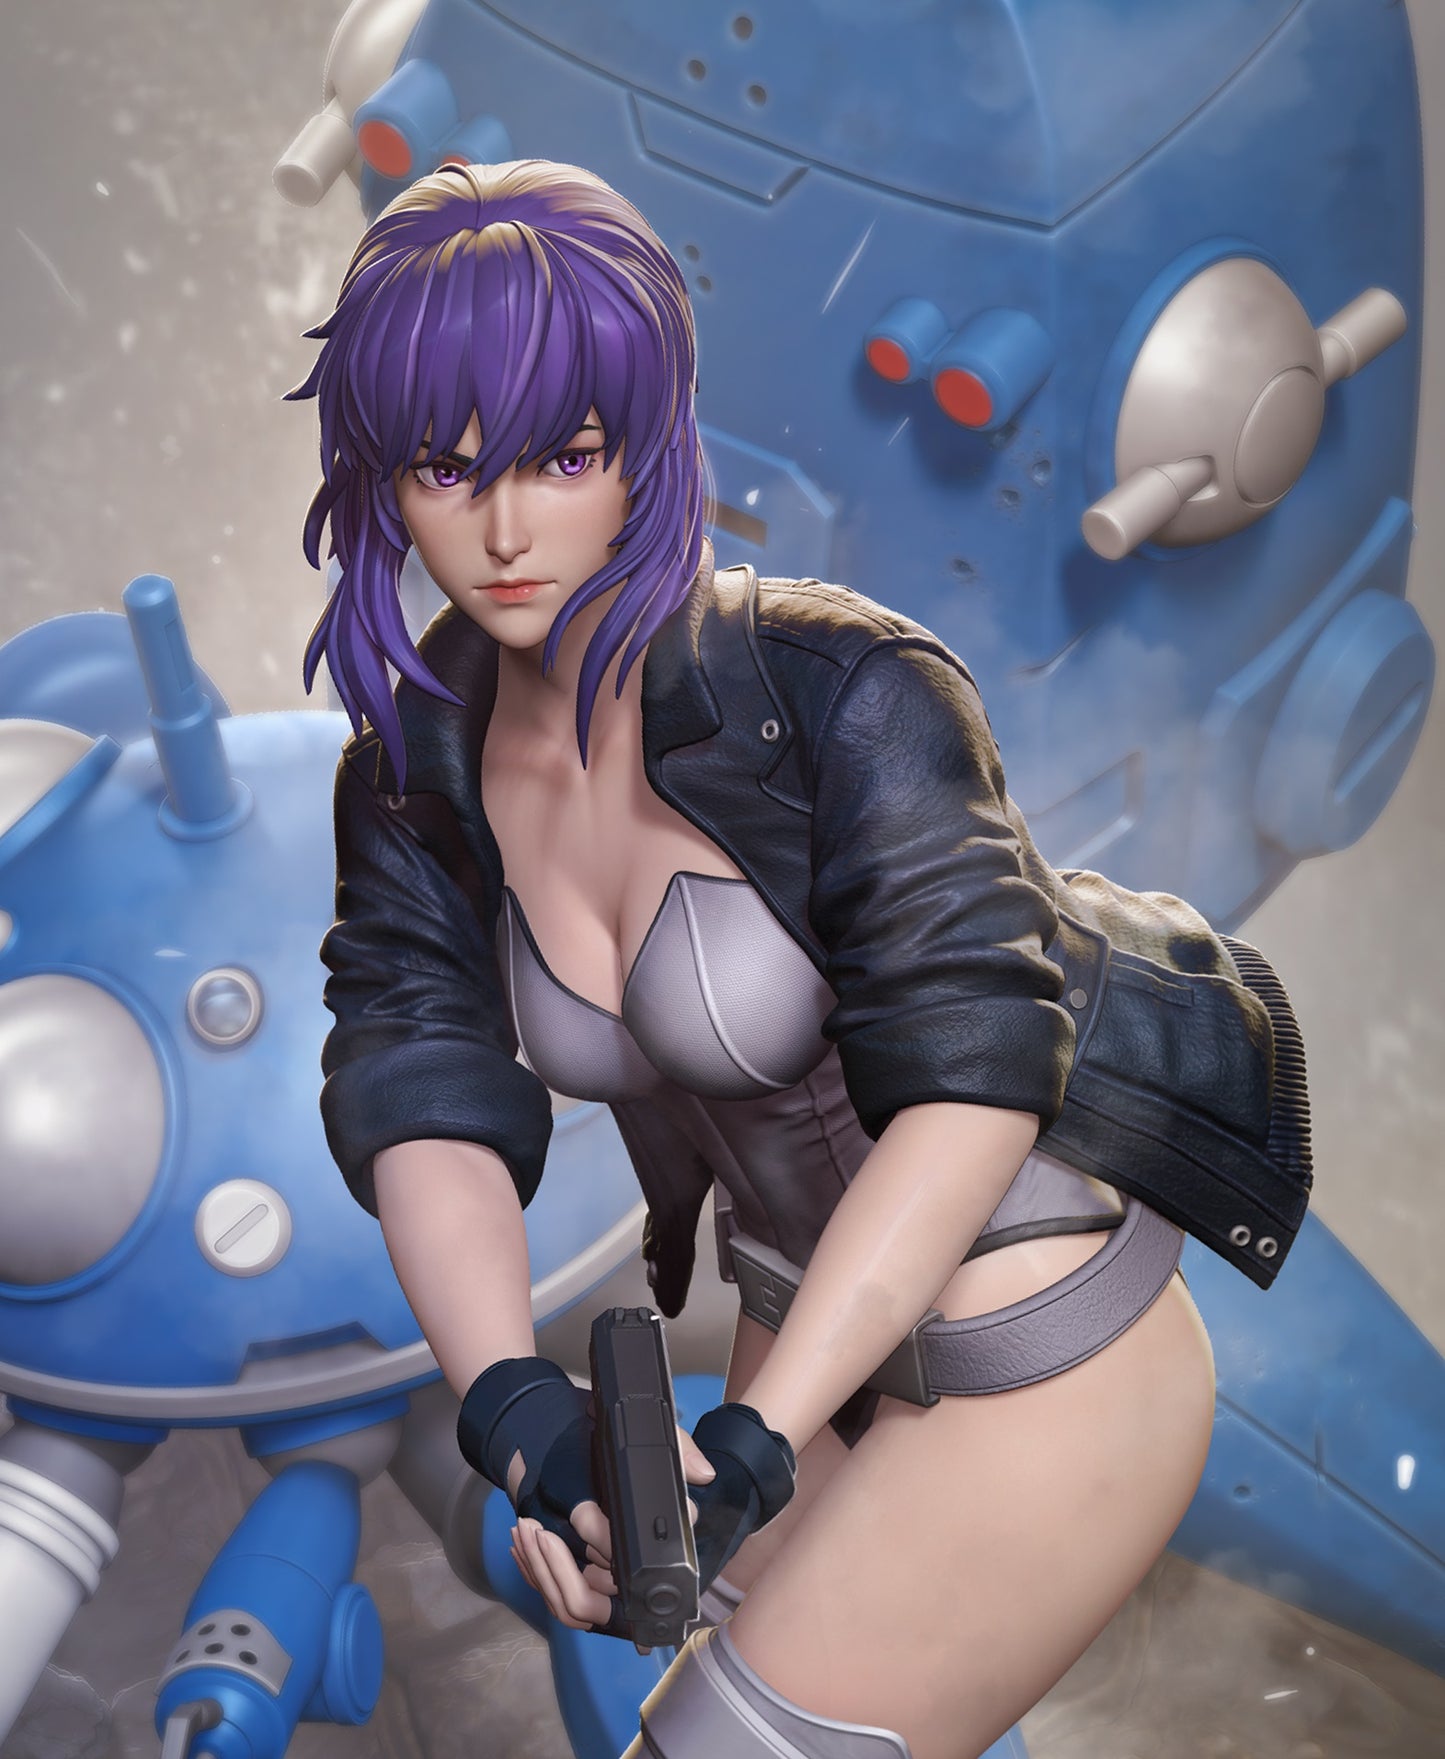 Ghost In The Shell STL Kusanagi STL Fichier Impression 3D Numérique STL Design Anime Character 0155